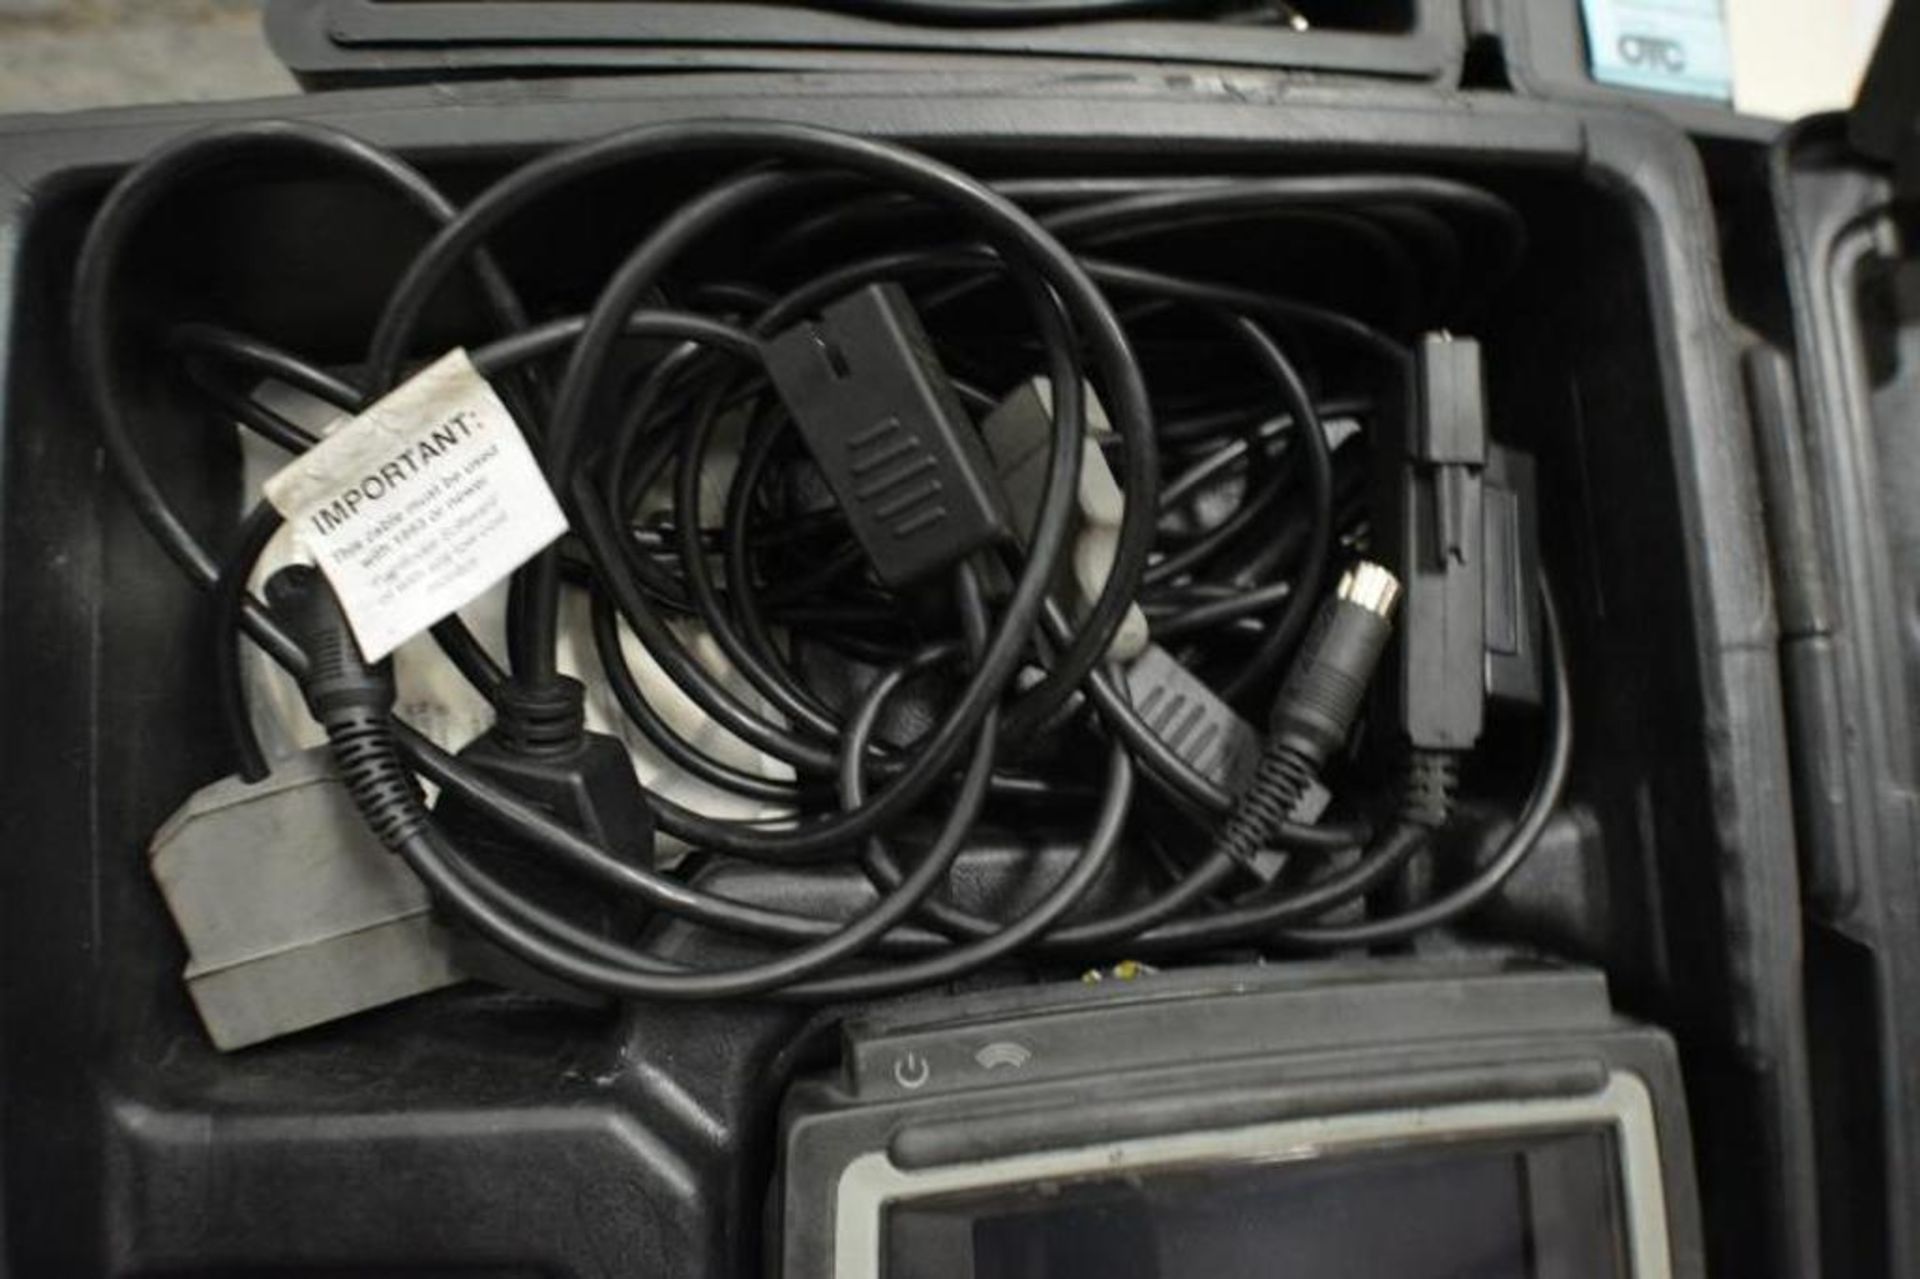 Diagnostic Scanner Genisys SPX OTC 2002 with Cables and Software Suite - Image 14 of 18